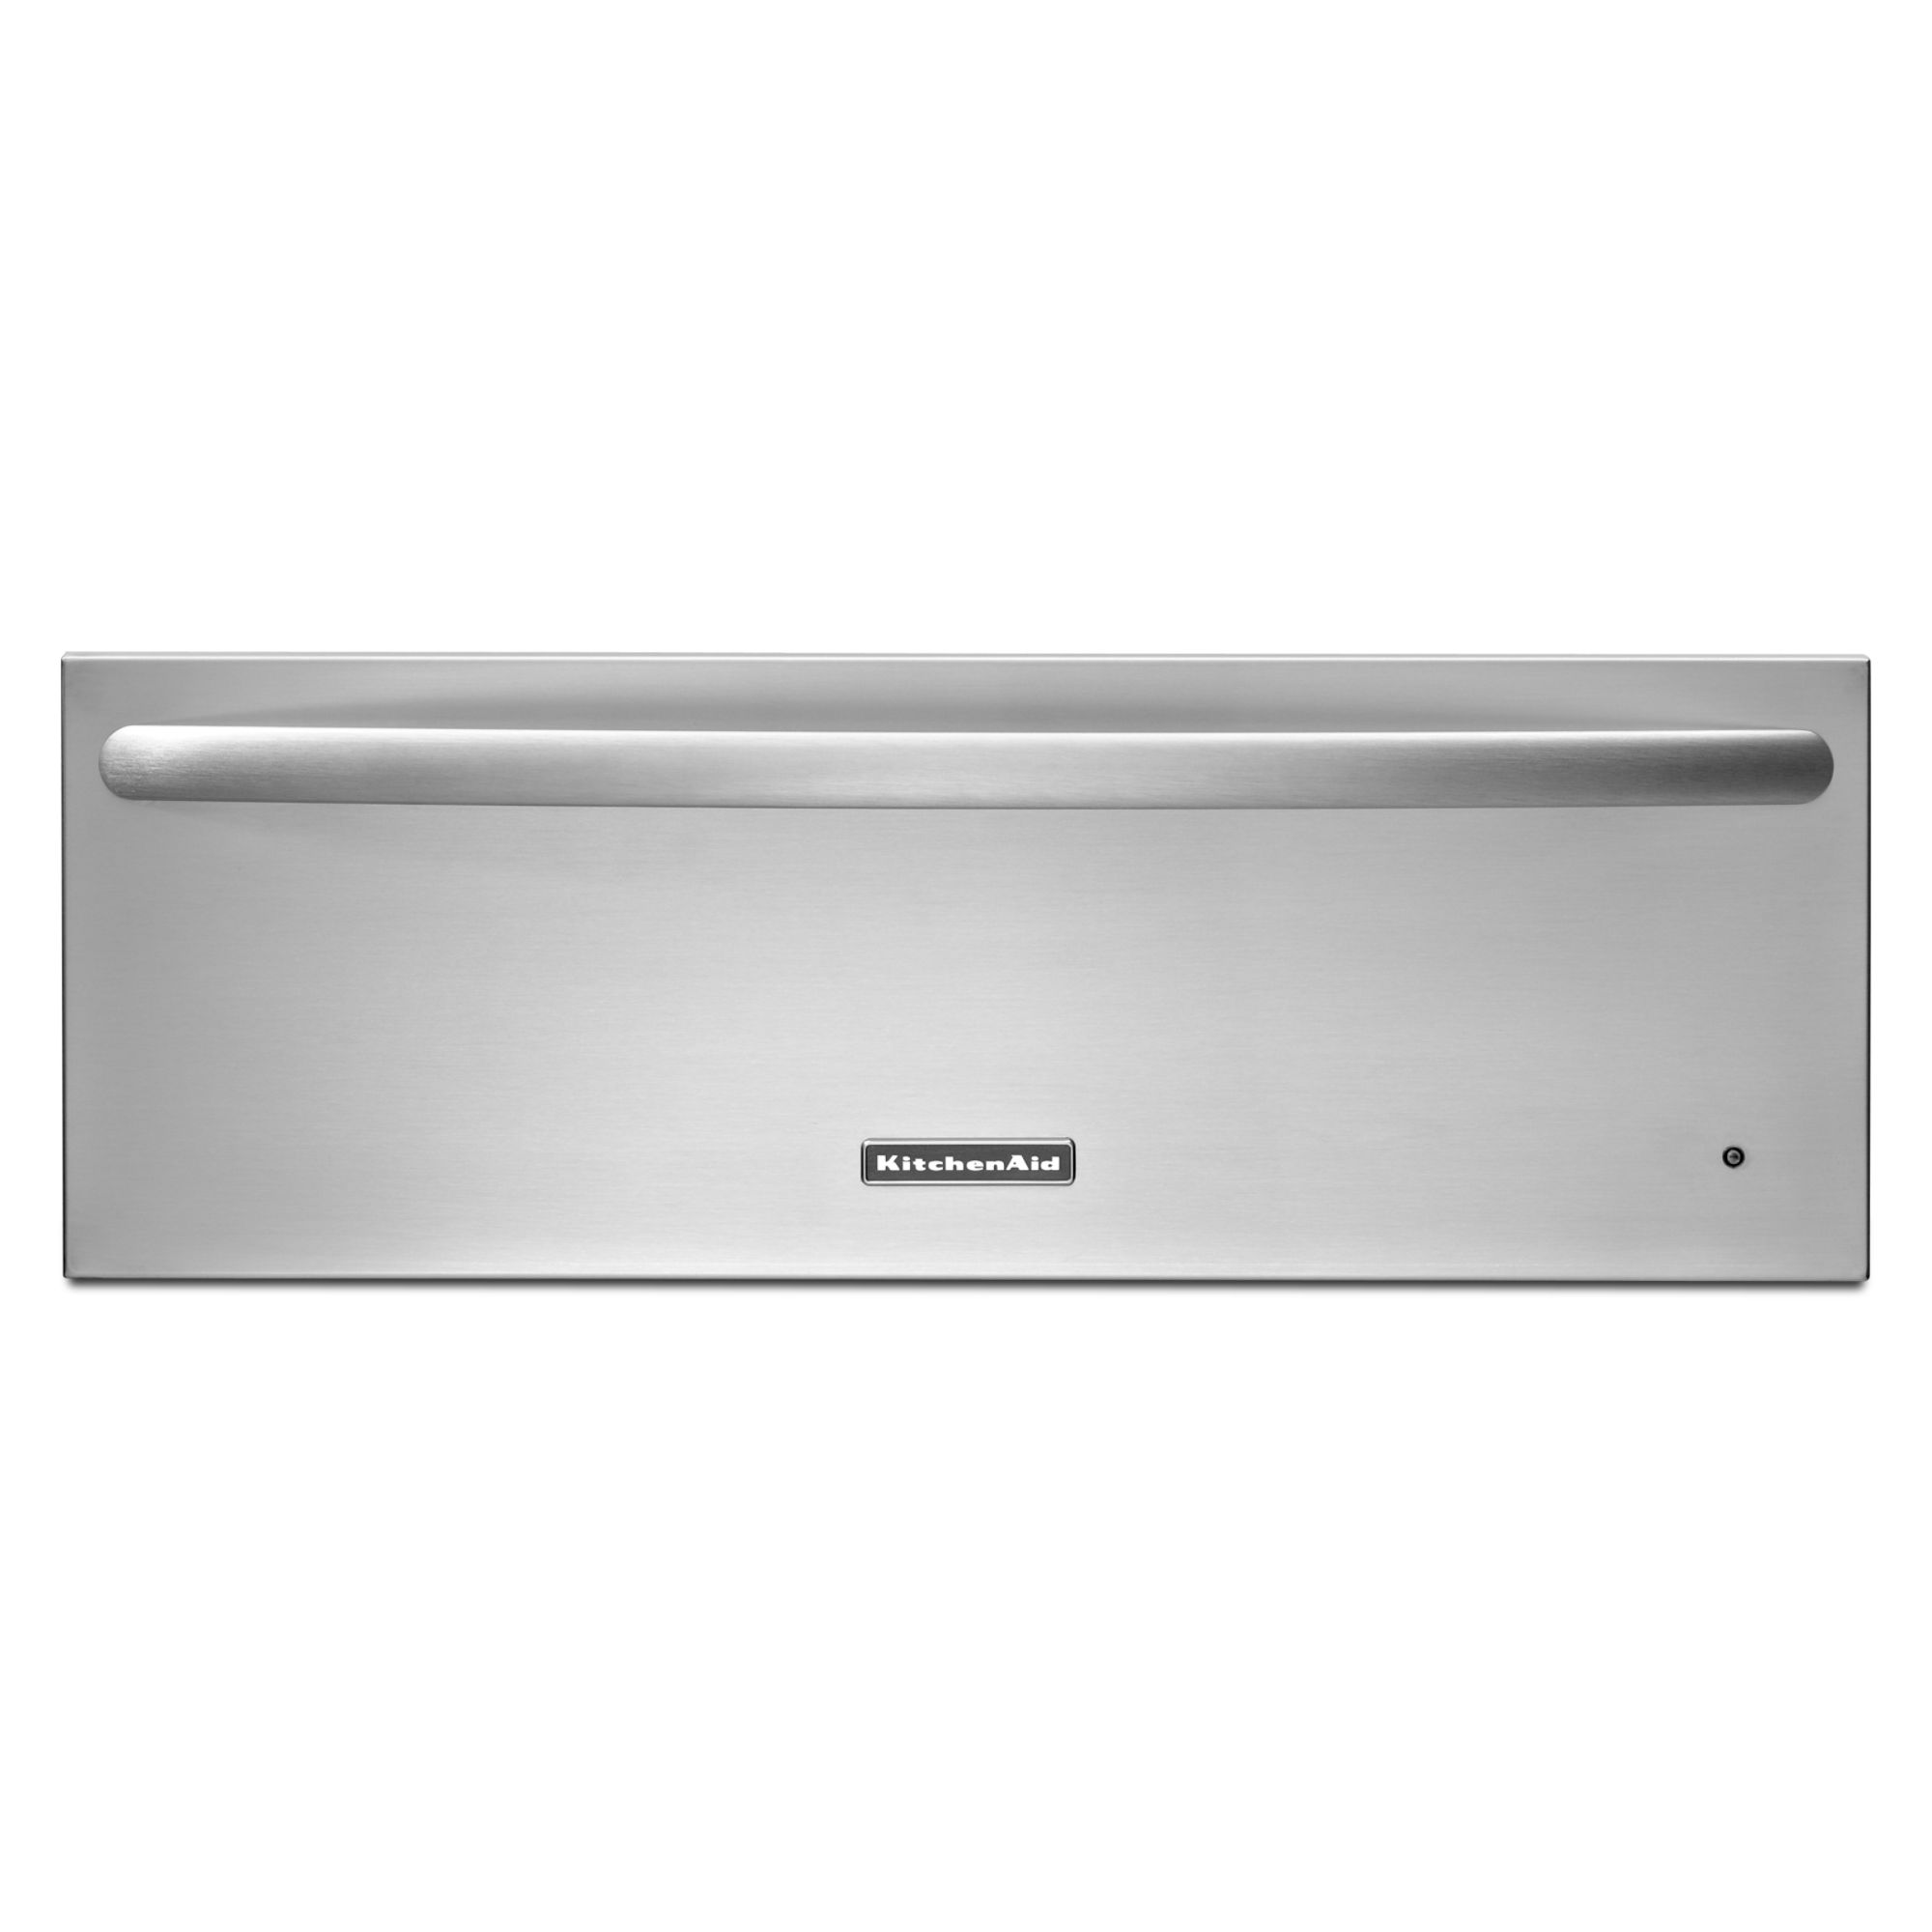 KitchenAid 27 Slow Cook Warming Drawer Architect Series II - Stainless Steel 2 position